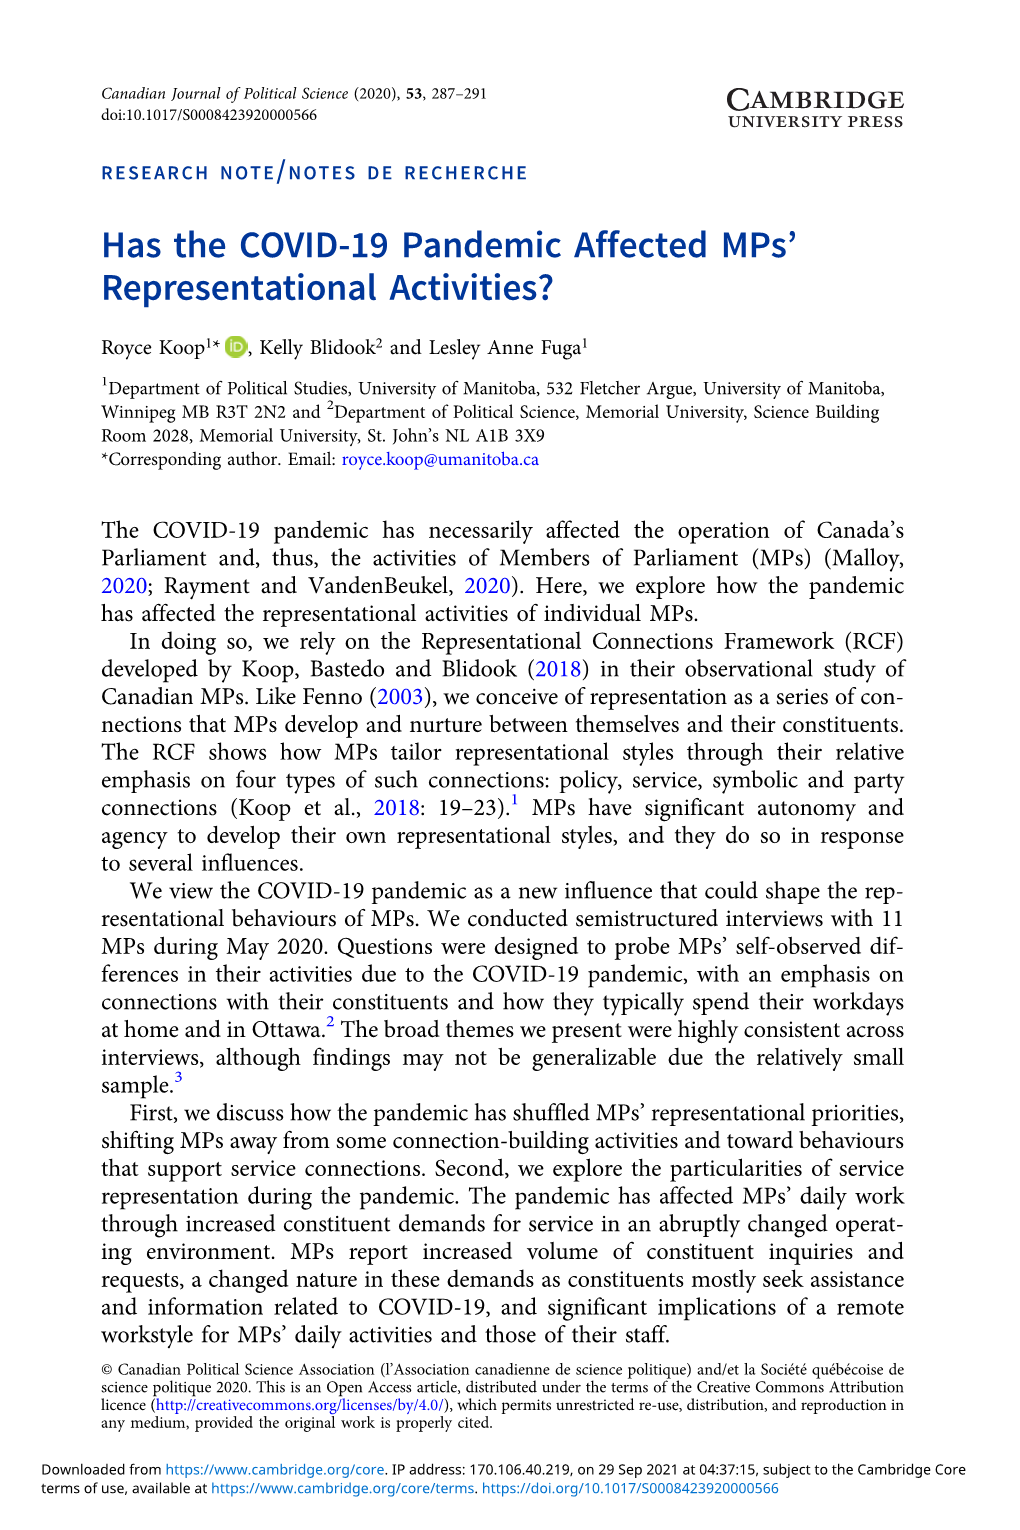 Has the COVID-19 Pandemic Affected Mps' Representational Activities?